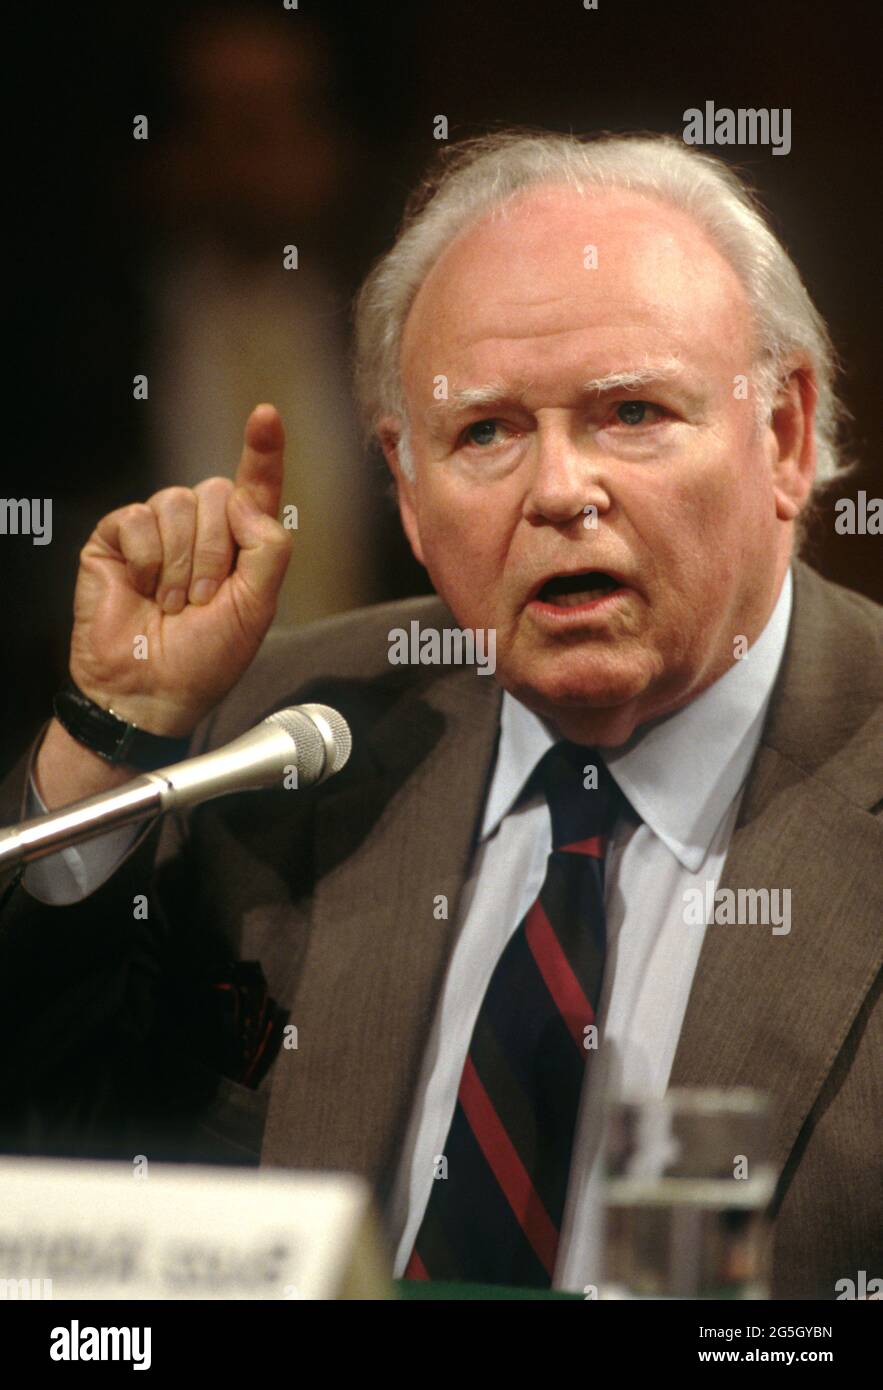 Washington, DC, USA. 24th March 1998. Actor Carroll O'Connor testifies on Drug Addiction before a Senate subcommittee on Labor Health and Human Services March 24, 1998 in Washington, D.C. Stock Photo